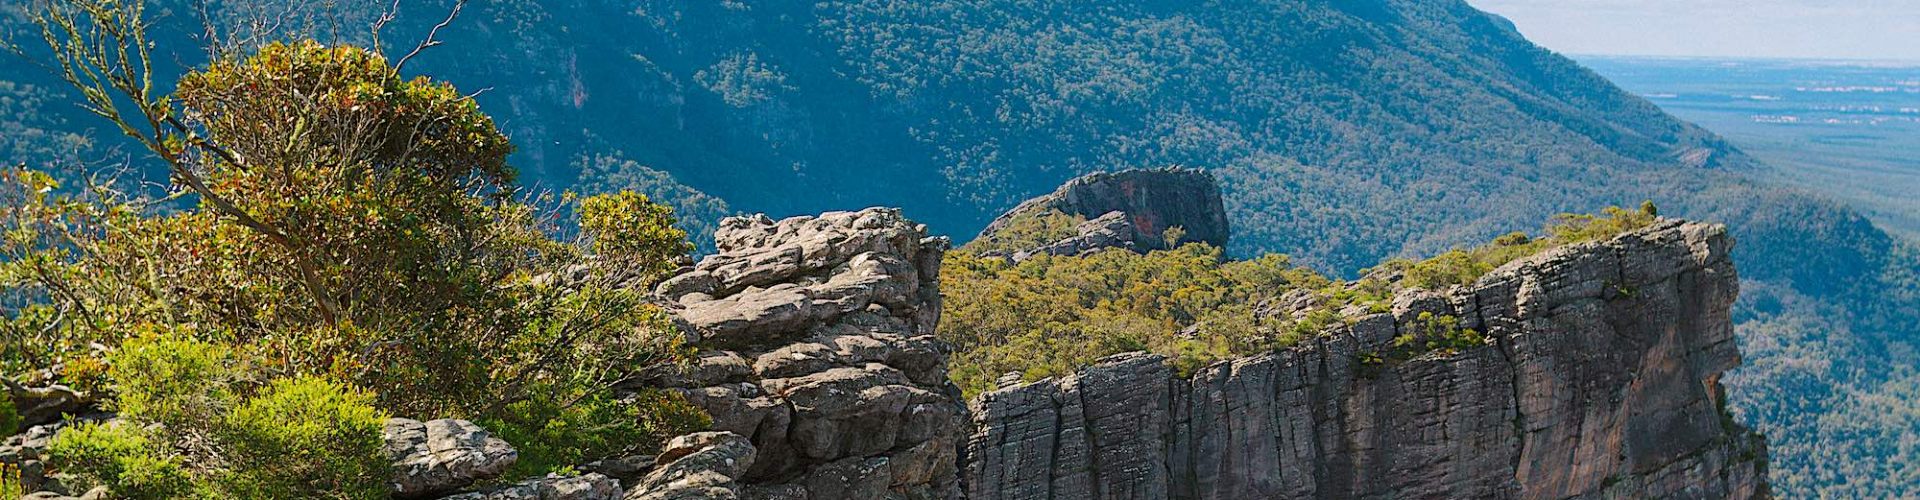 10 Best Things to Do in the Grampians, VIC inner banner